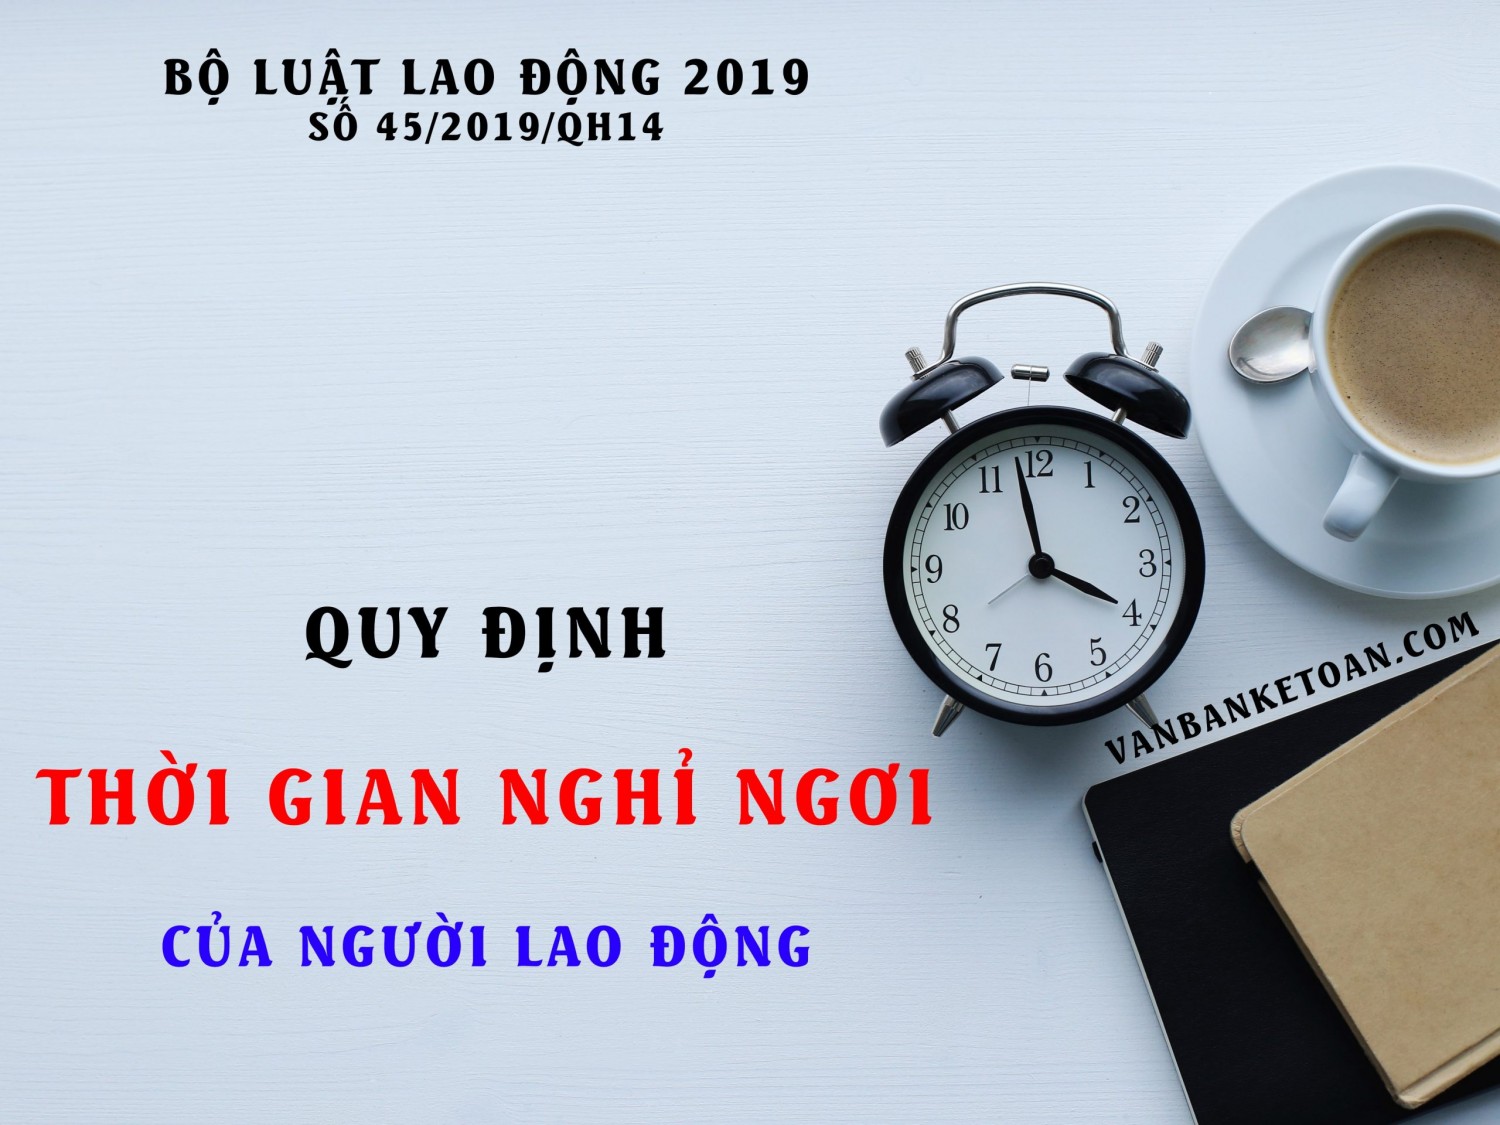 bo luat lao dong 2019 quy dinh ve thoi gian nghi ngoi cua nguoi lao dong scaled